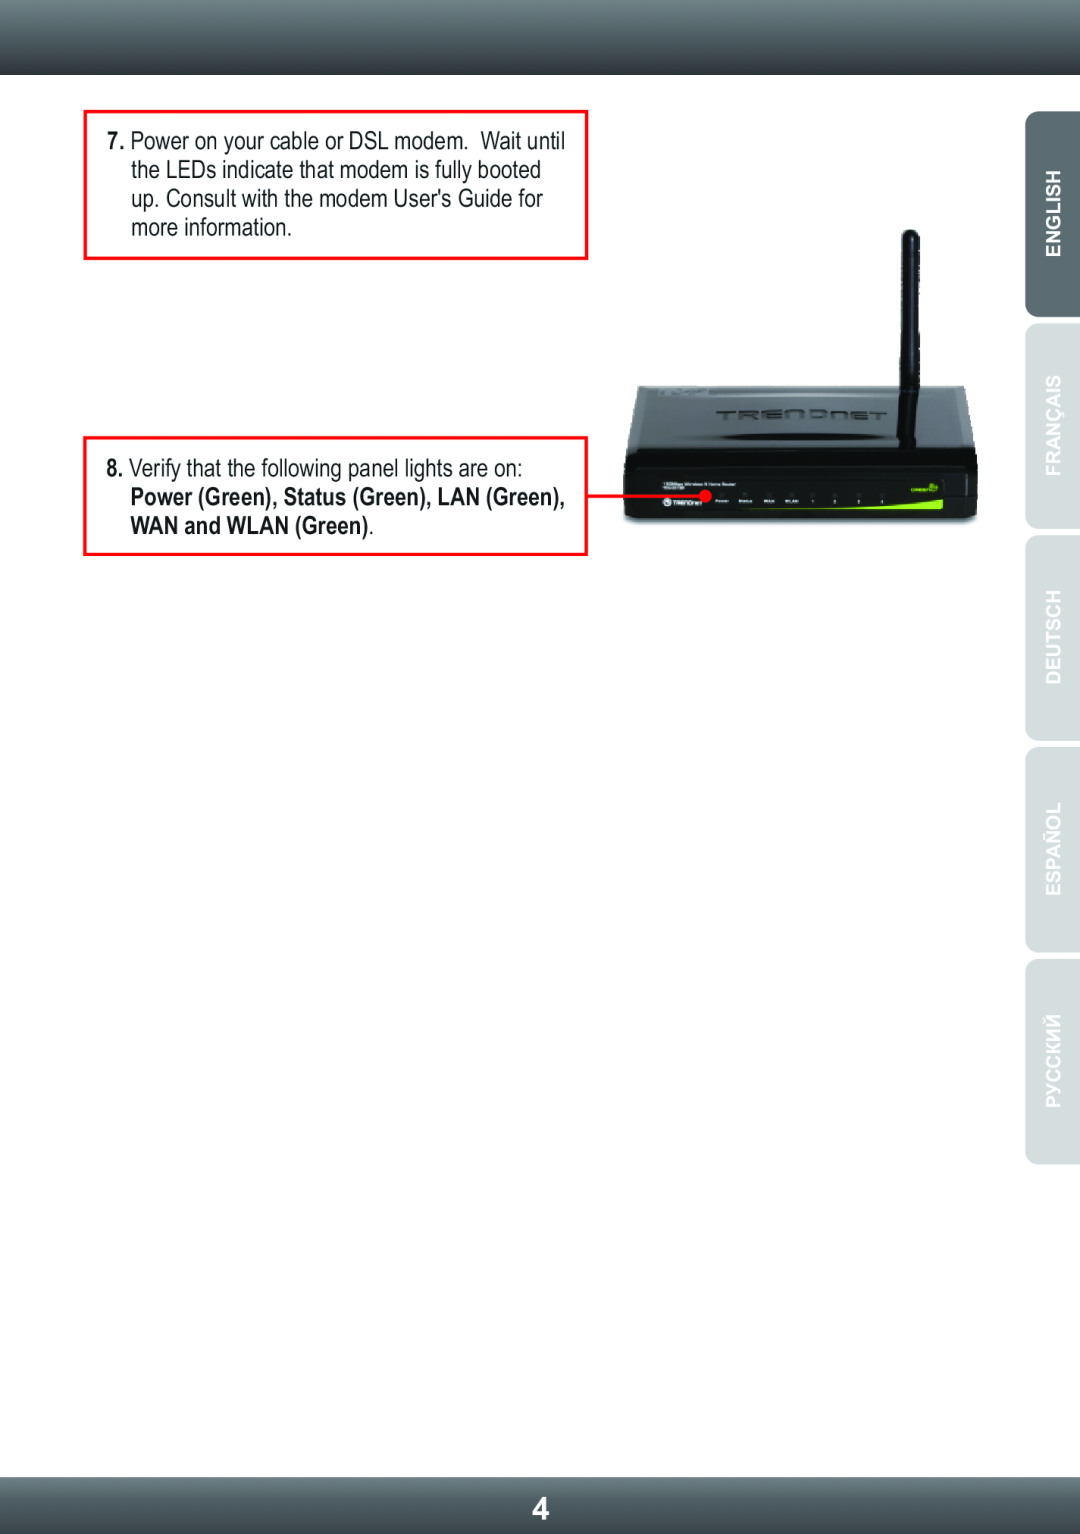 TRENDnet Wireless Router, TEW-651BR Verify that the following panel lights are on, Русскийespañoldeutschfrançaisenglish 